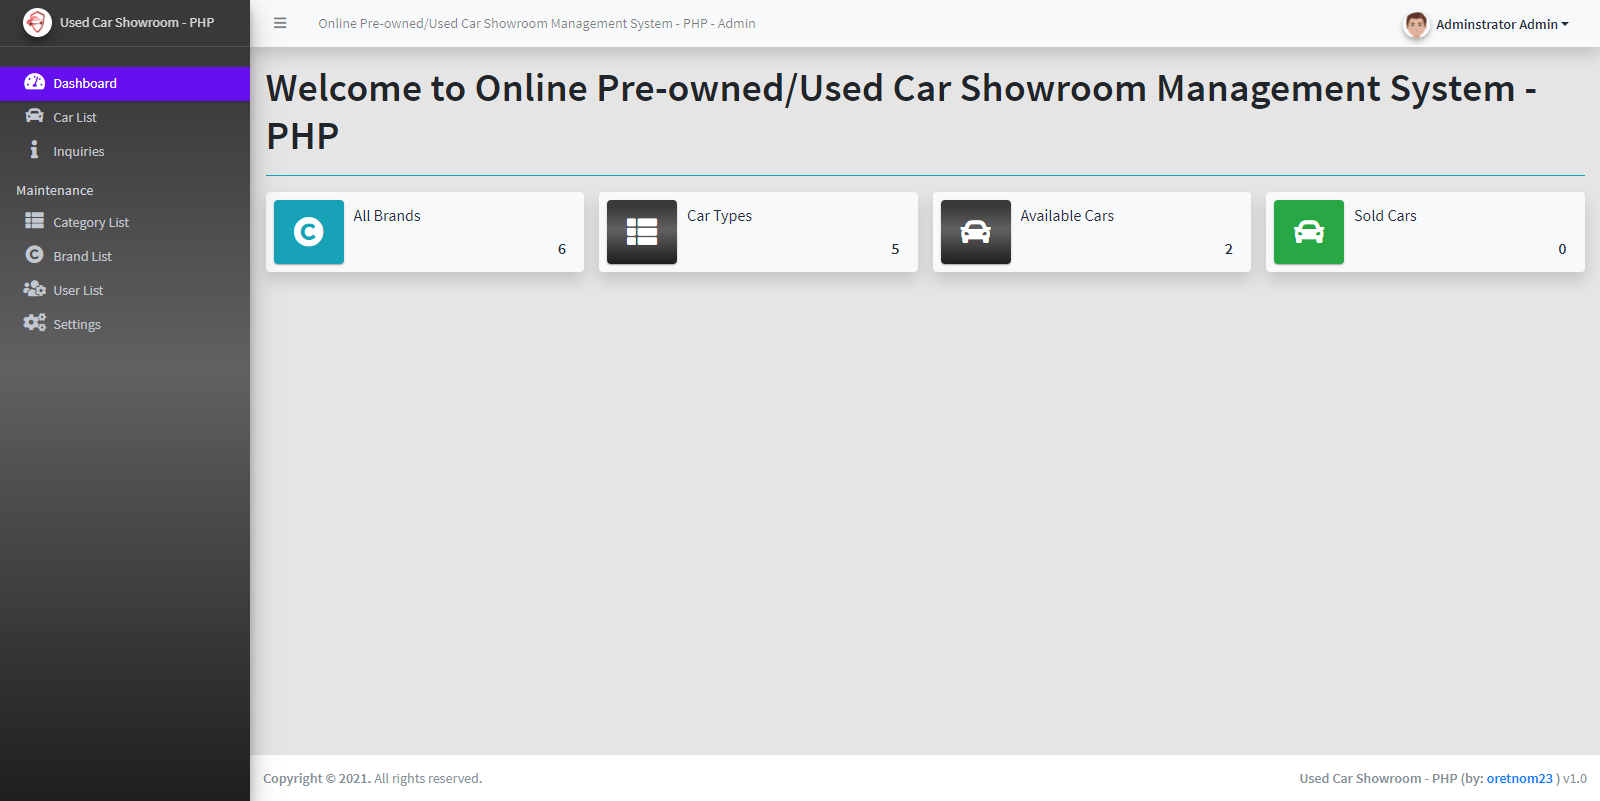 Online Pre-owned/Used Car Showroom Management System